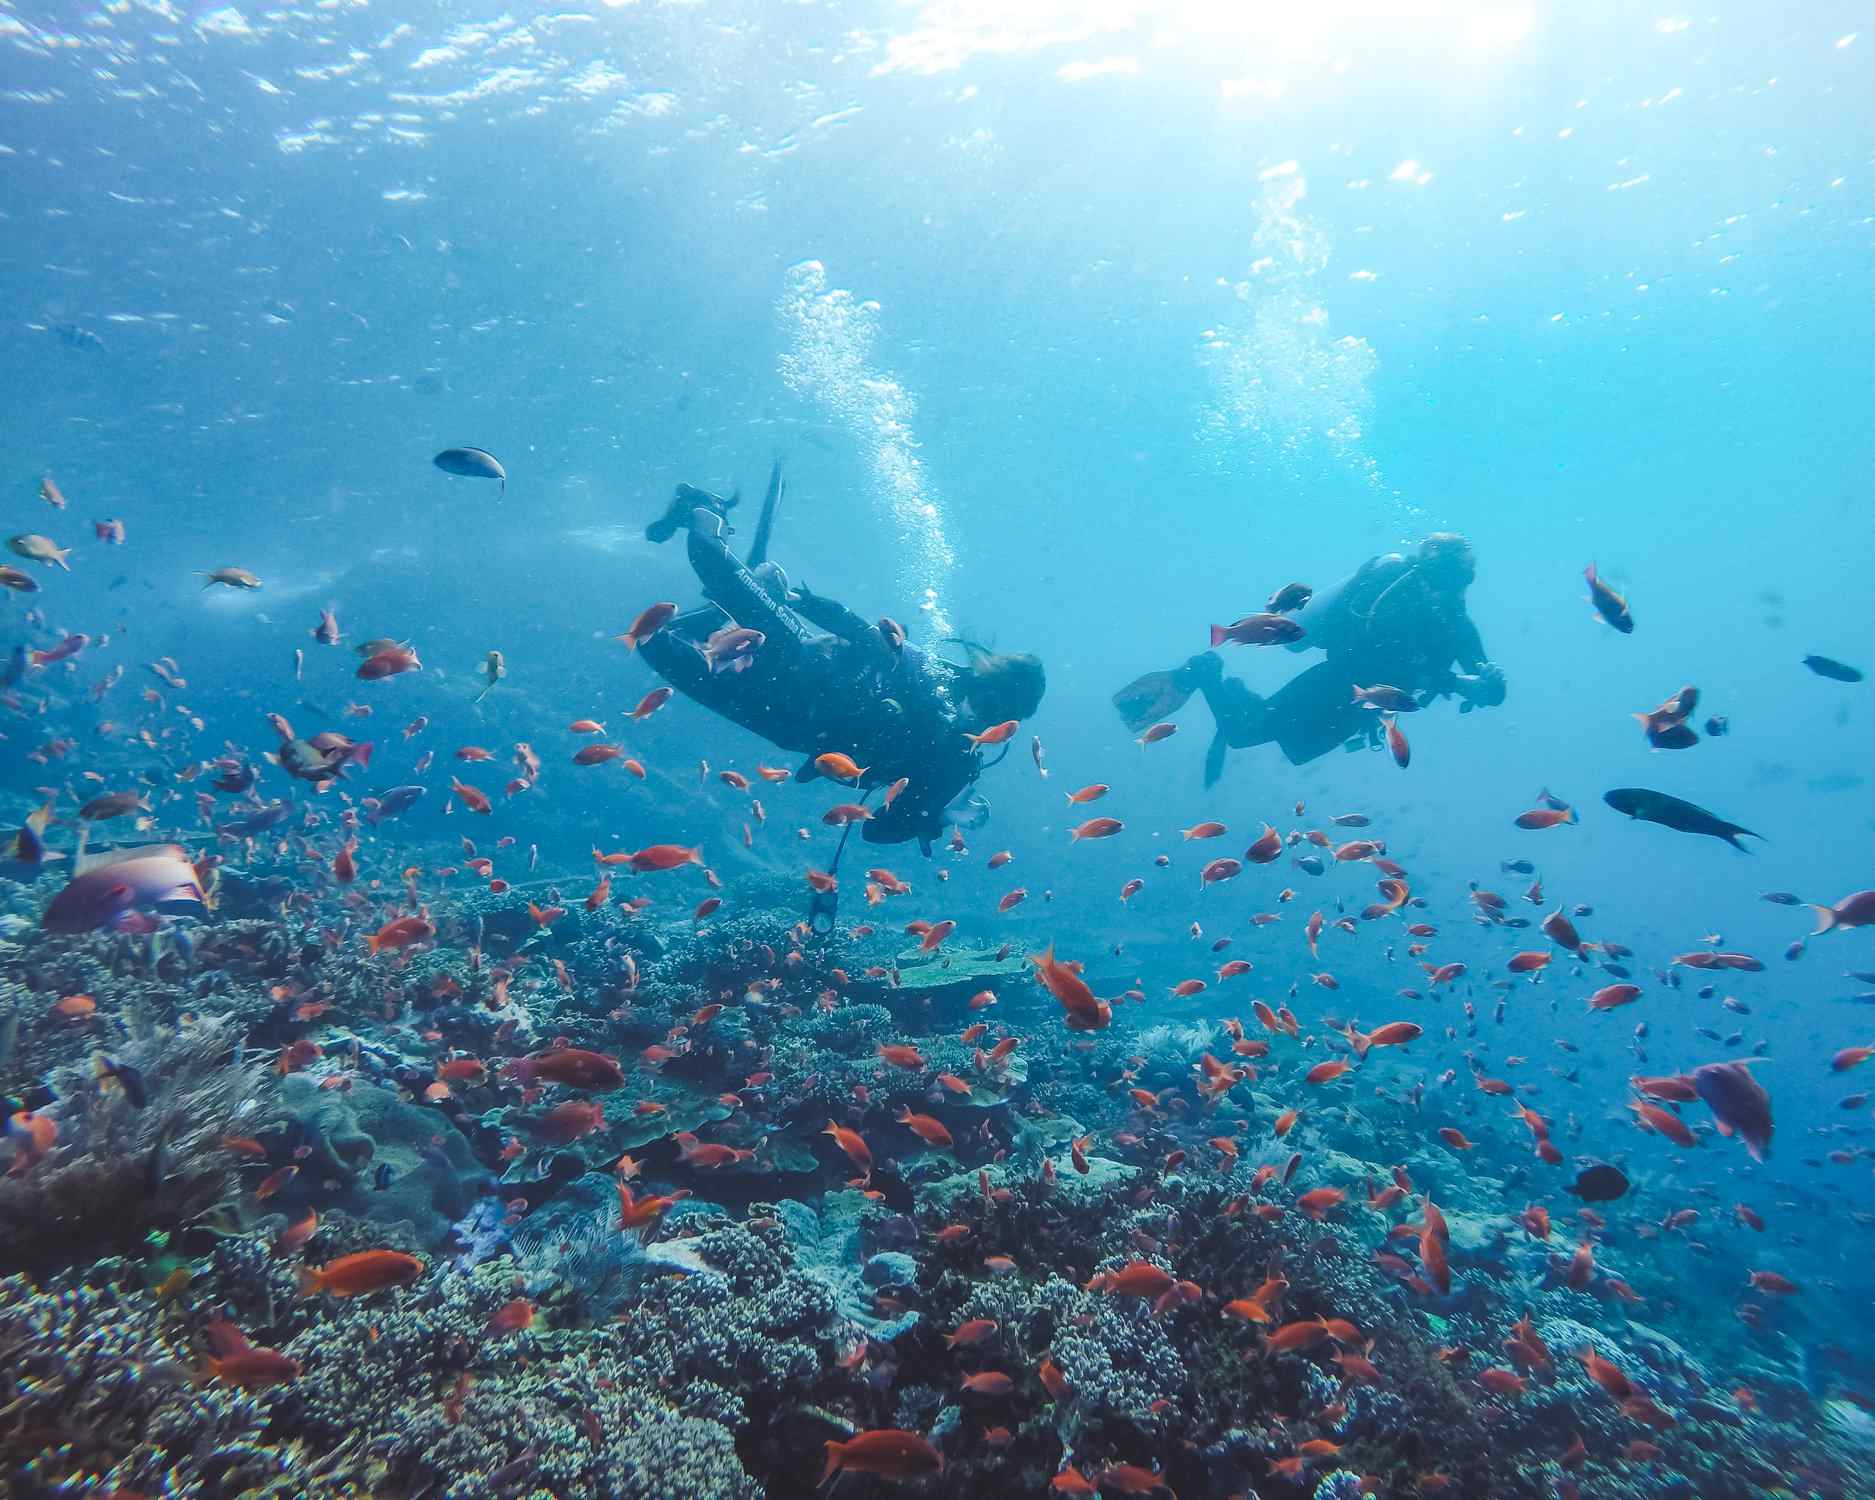 Reiss Bush marine biologist at atmosphere, diving on a reef